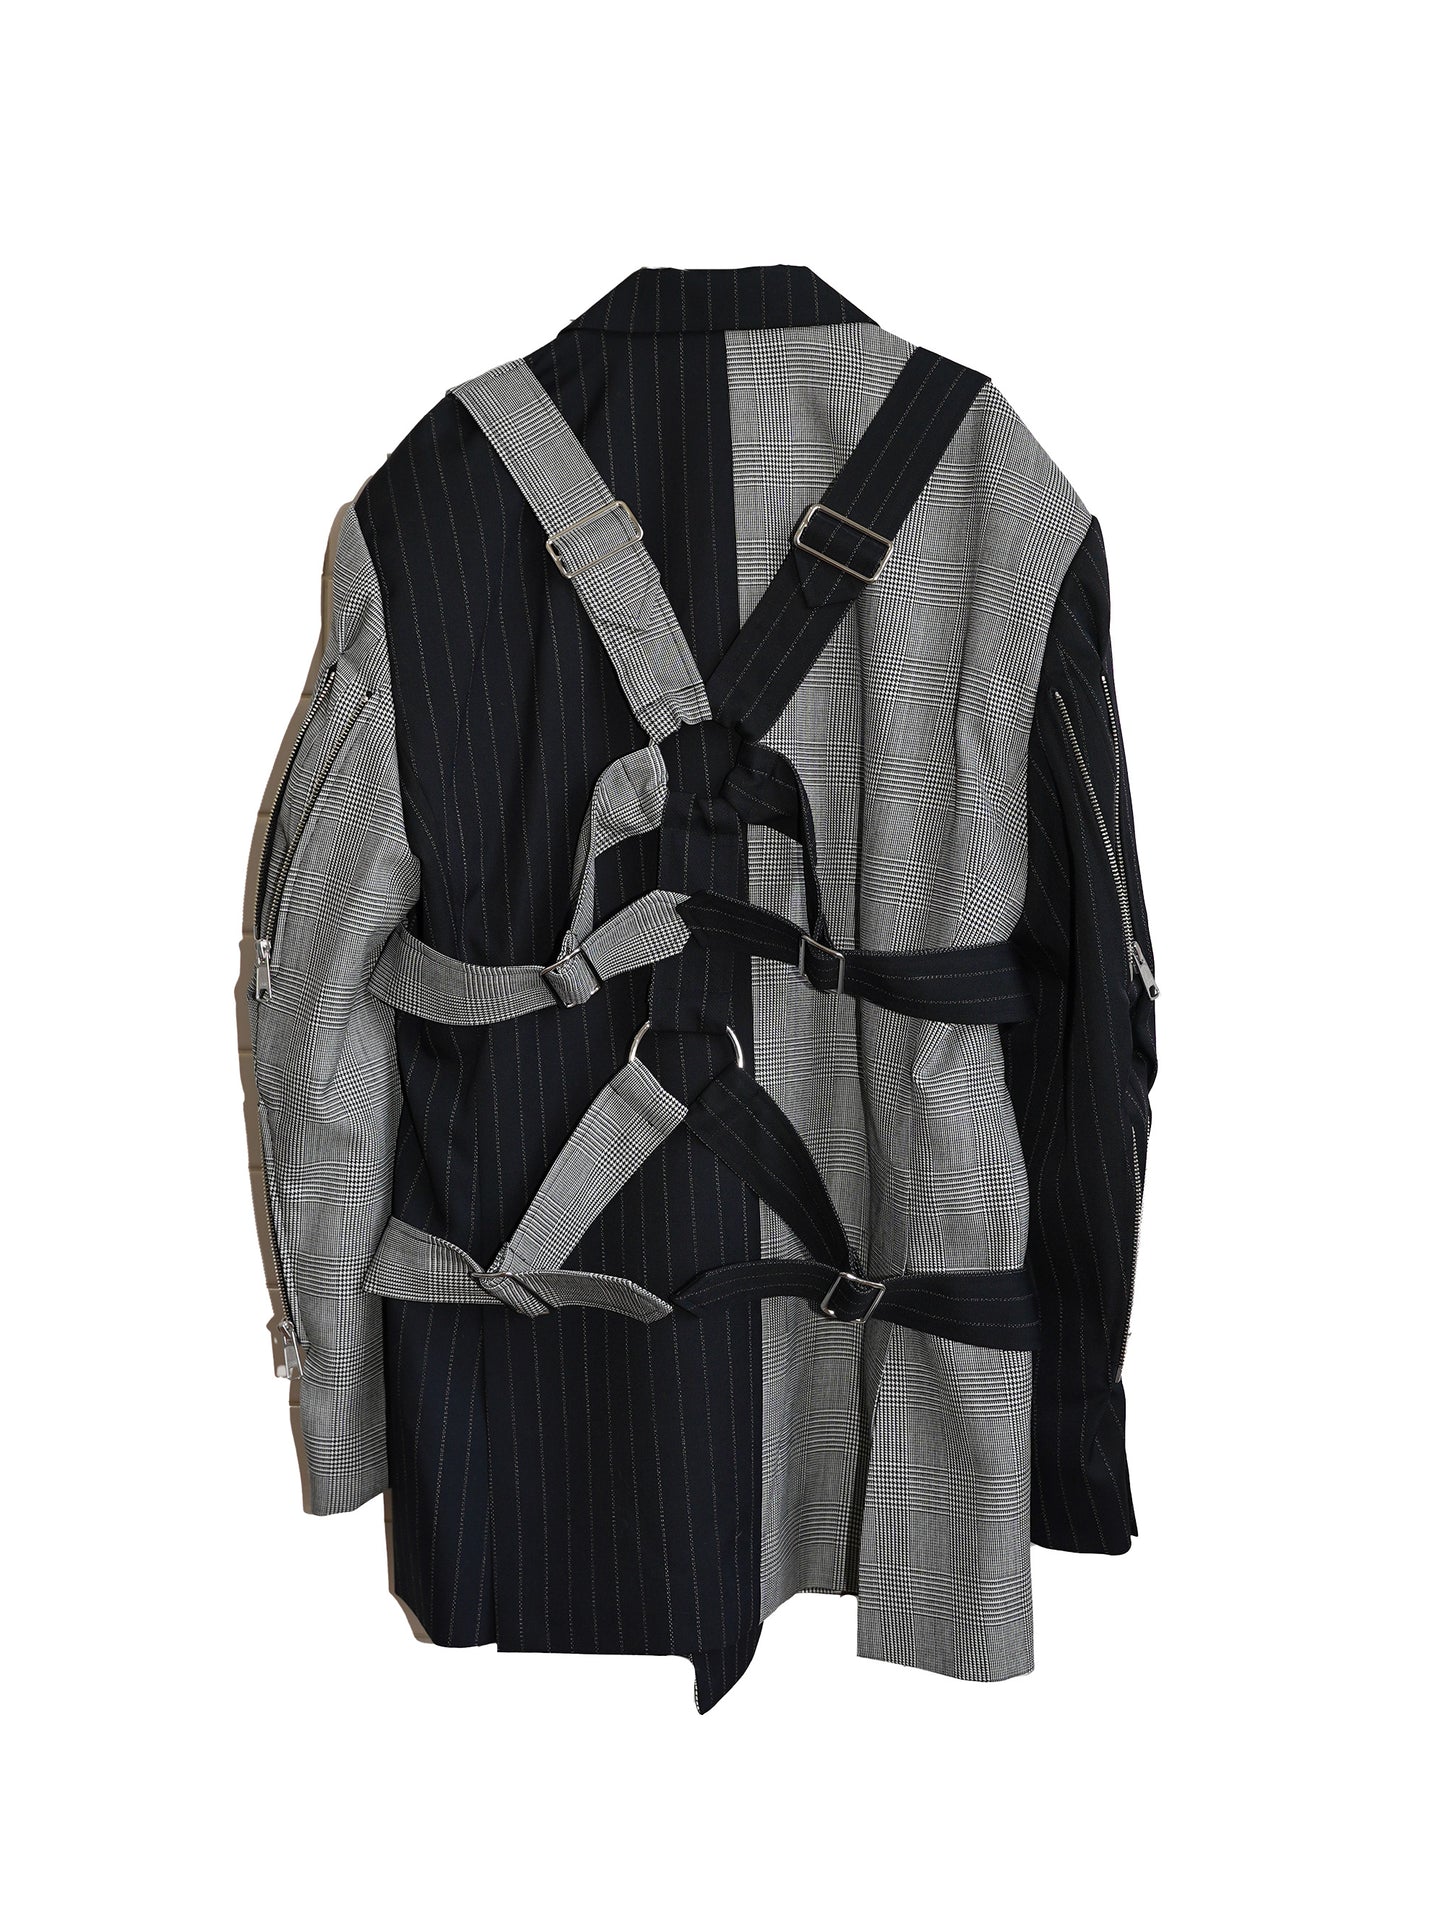 el conductorH CRAZY PATTERN DOUBLE BREASTED PARACHUTE JKT